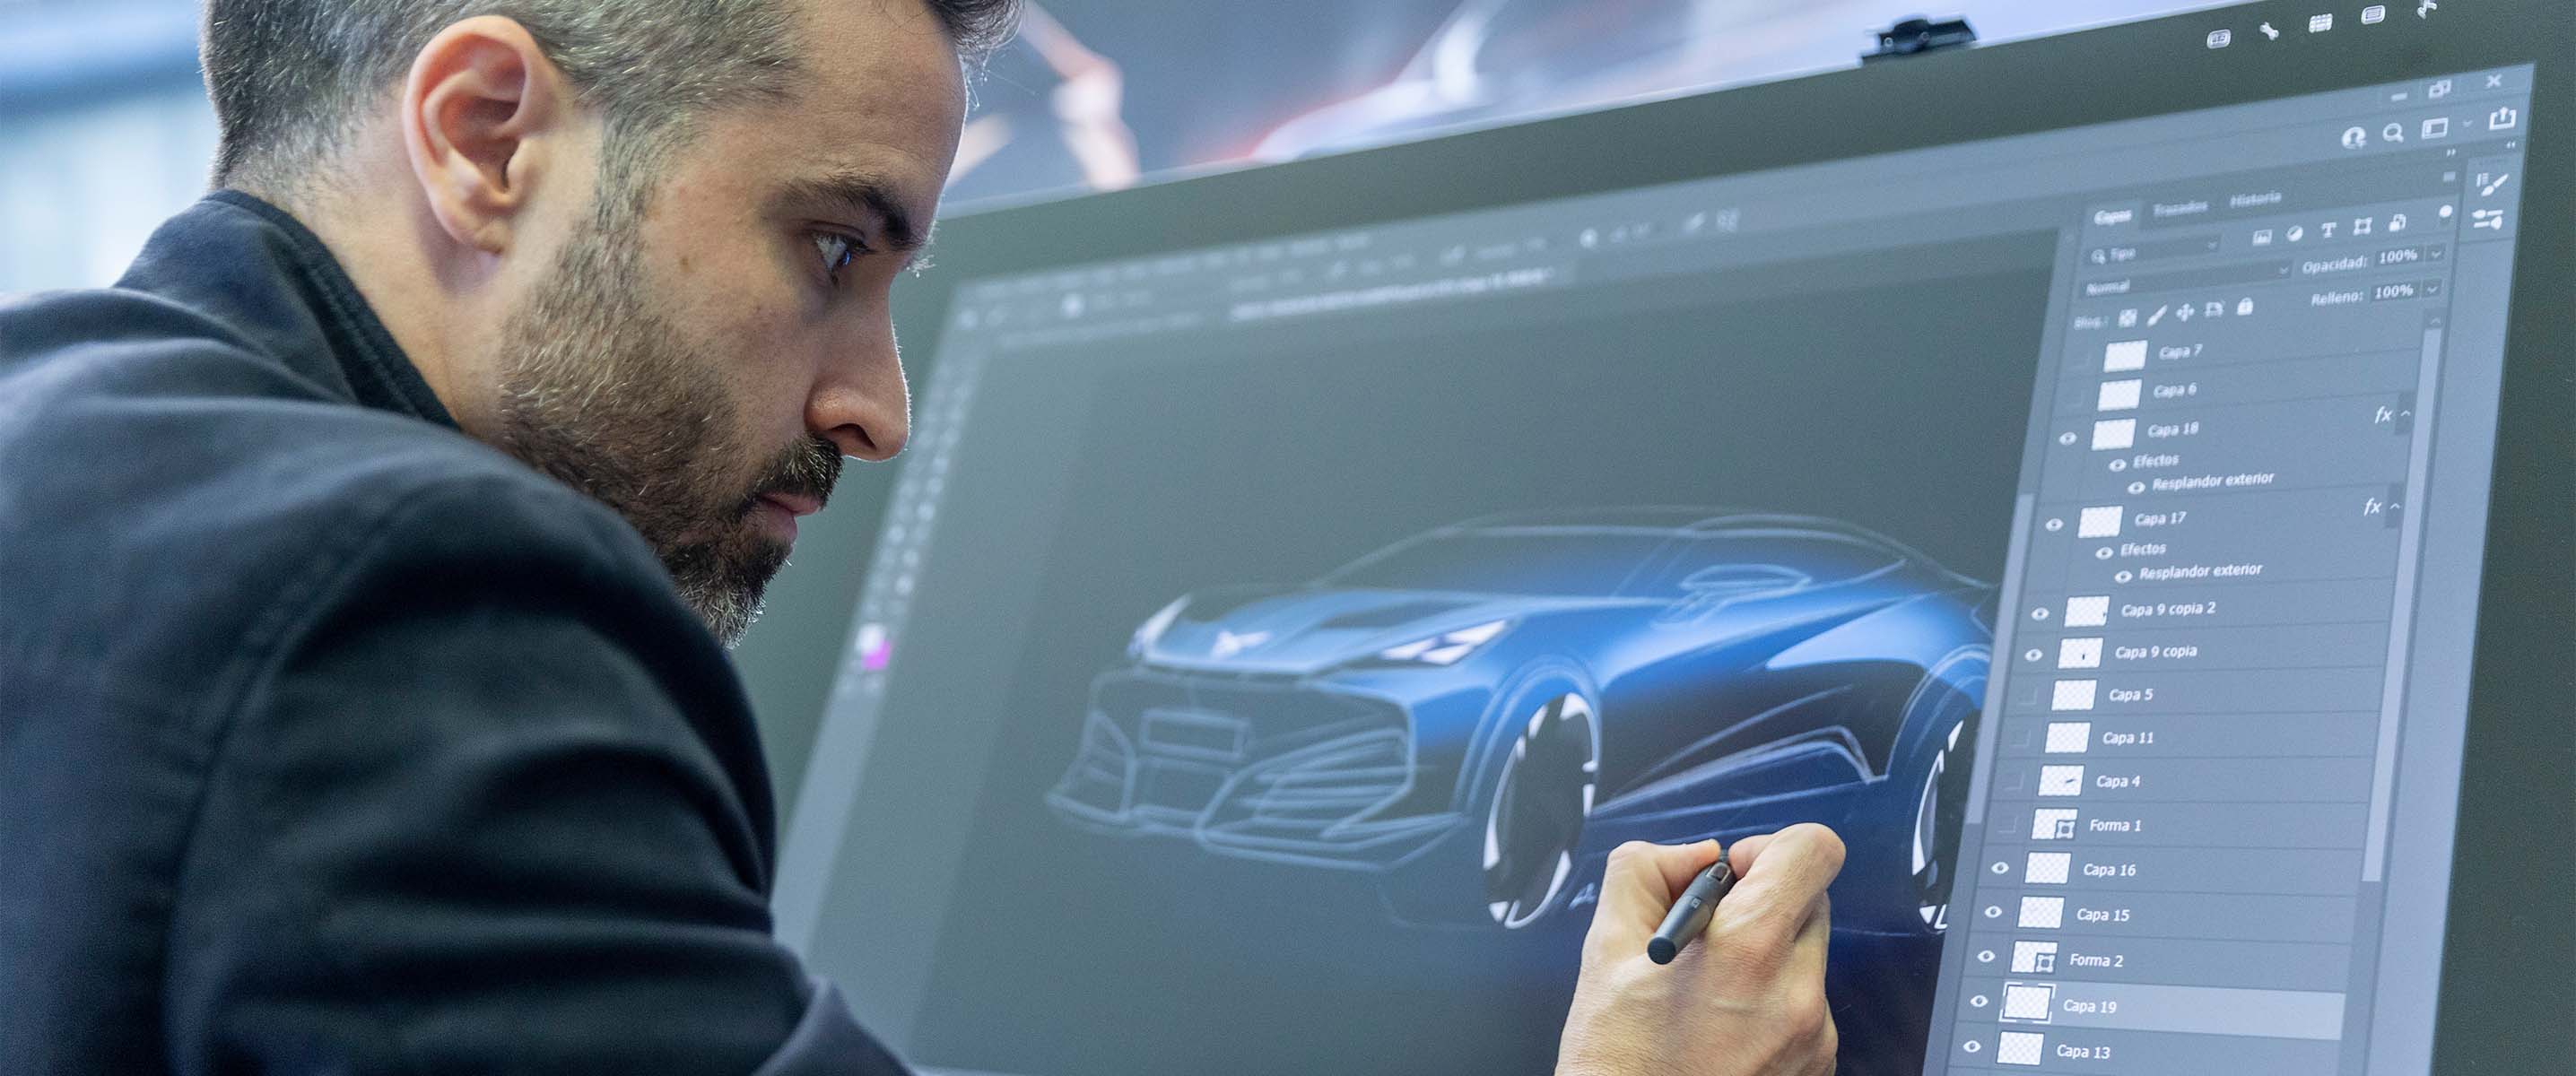 new design language for cupra tavascan, exterior design process with touchscreen